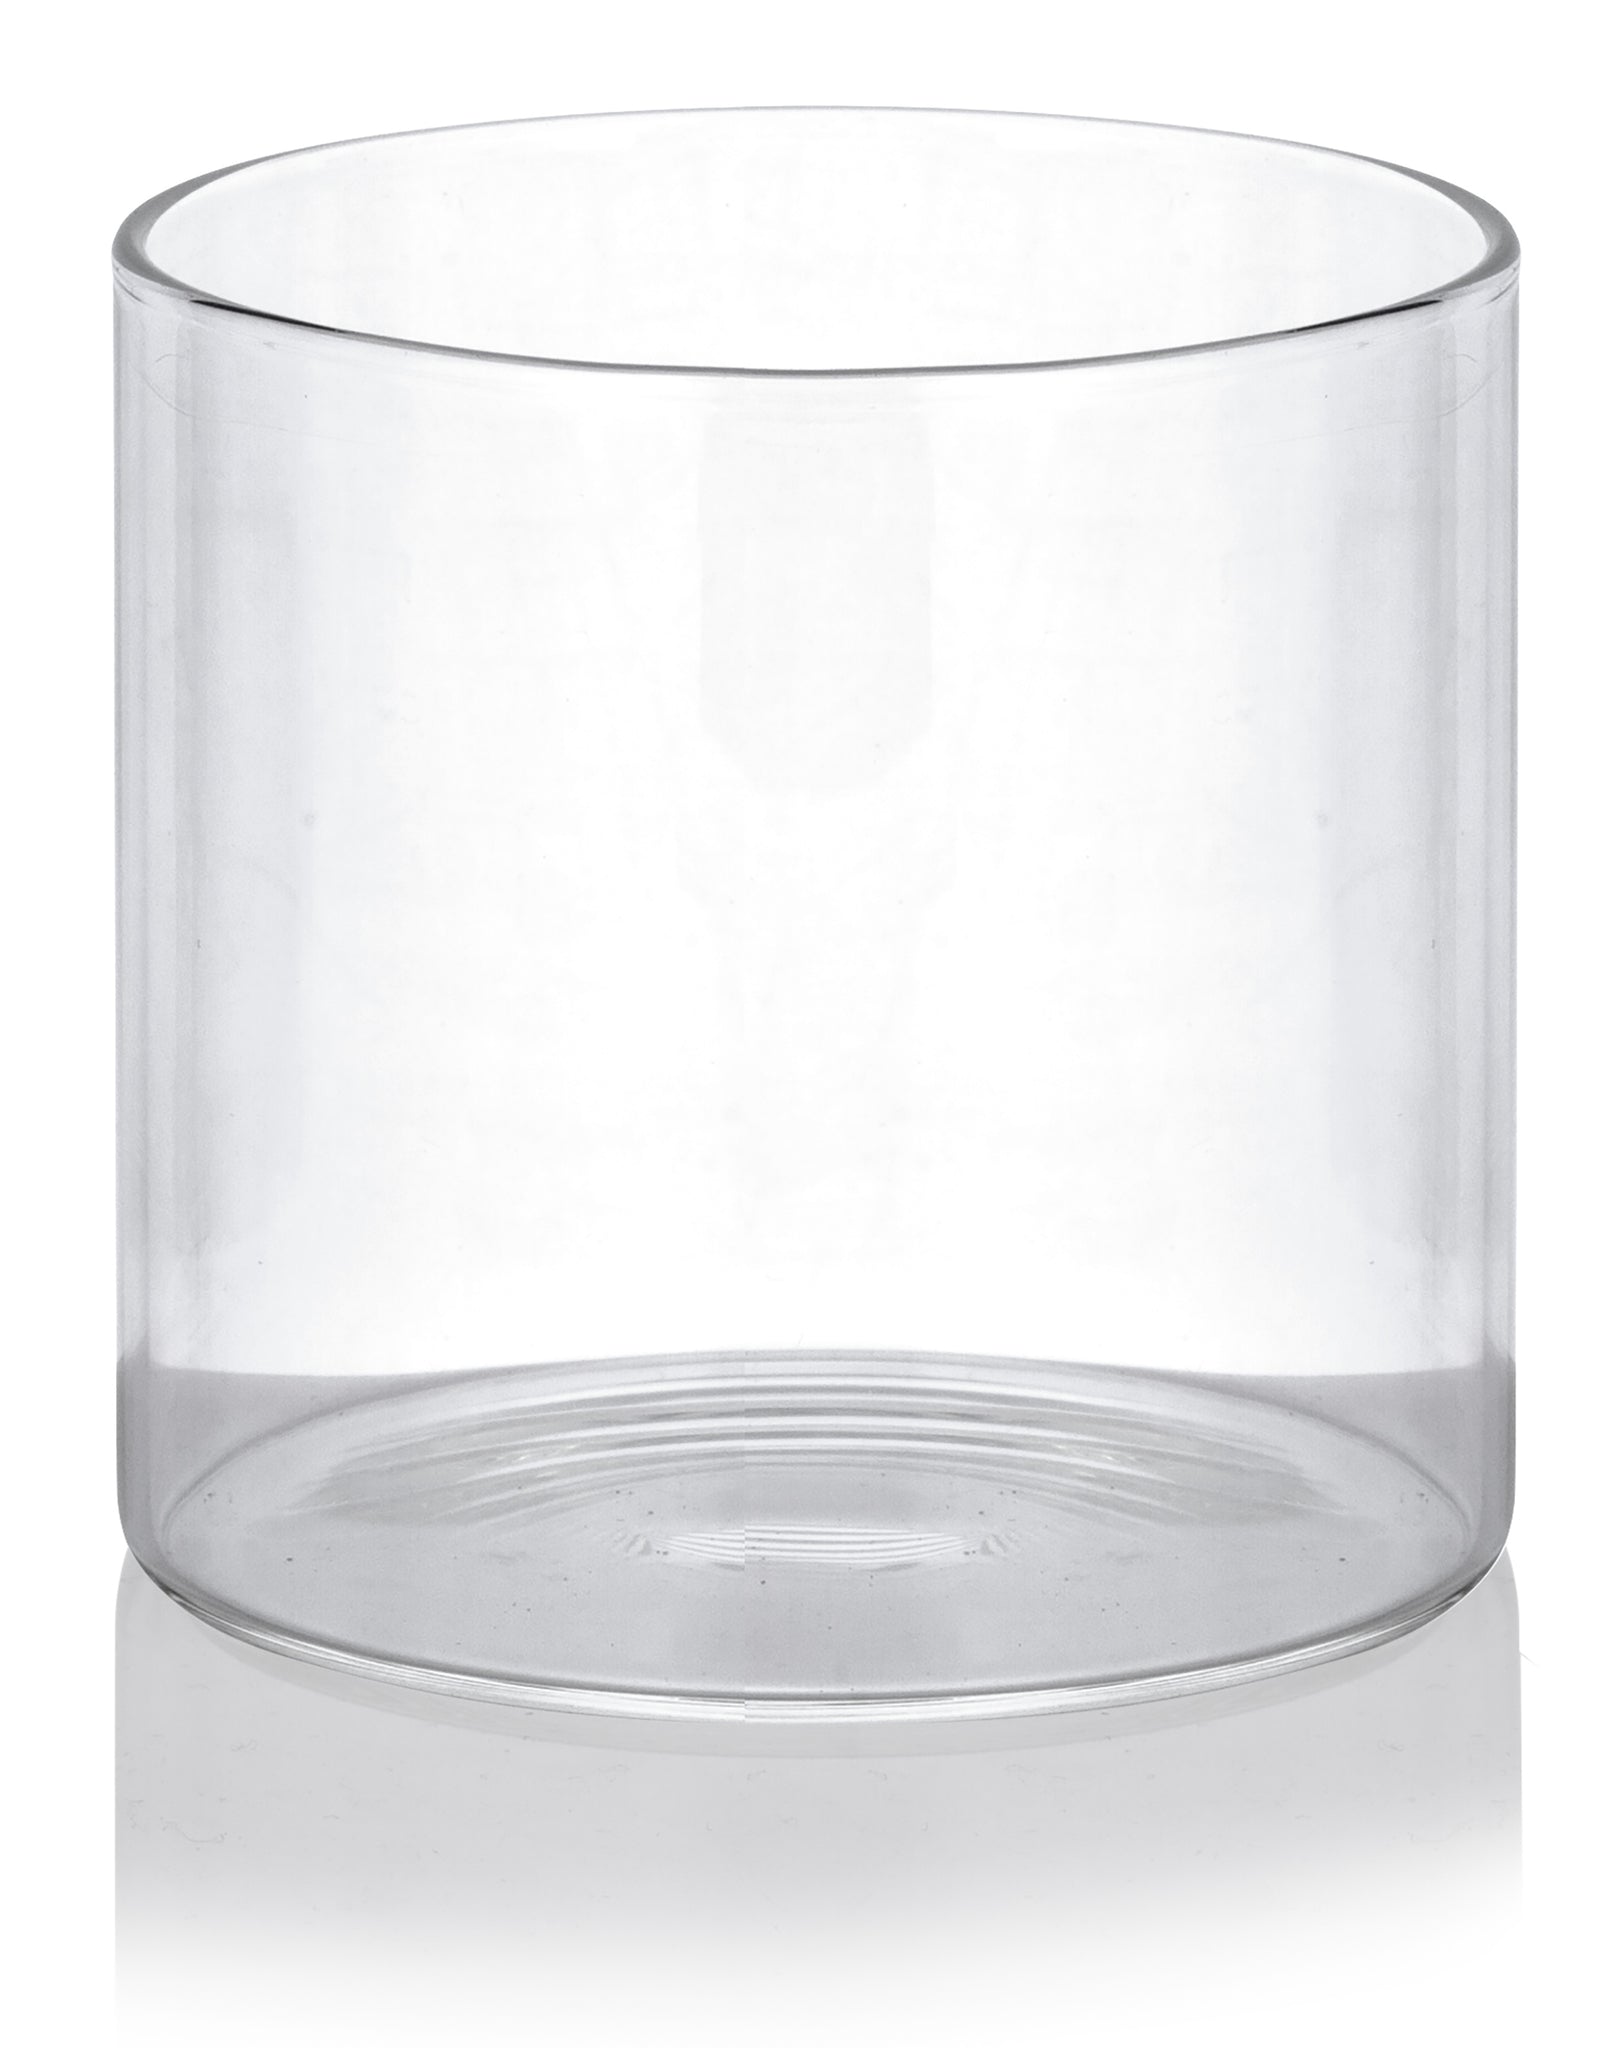 16 oz Premium Borosilicate Clear Glass Drinking Cup (6 Pack)